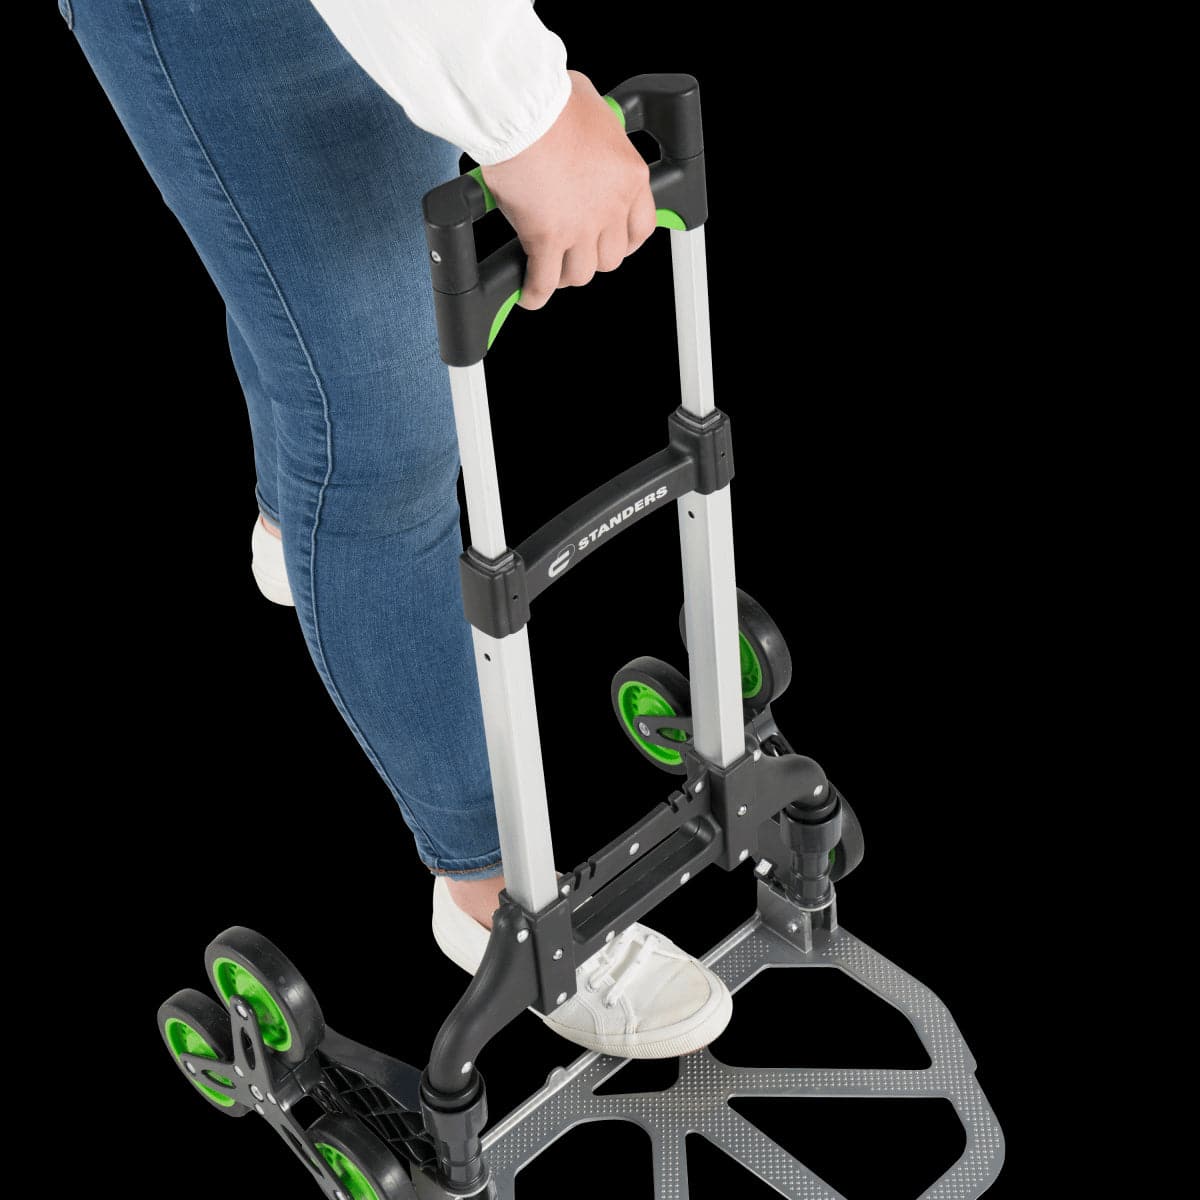 ALUMINIUM FOLDING STAIR TROLLEY STANDERS CAPACITY 70 KG WITH 3 WHEELS ON EACH SIDE - best price from Maltashopper.com BR410006570